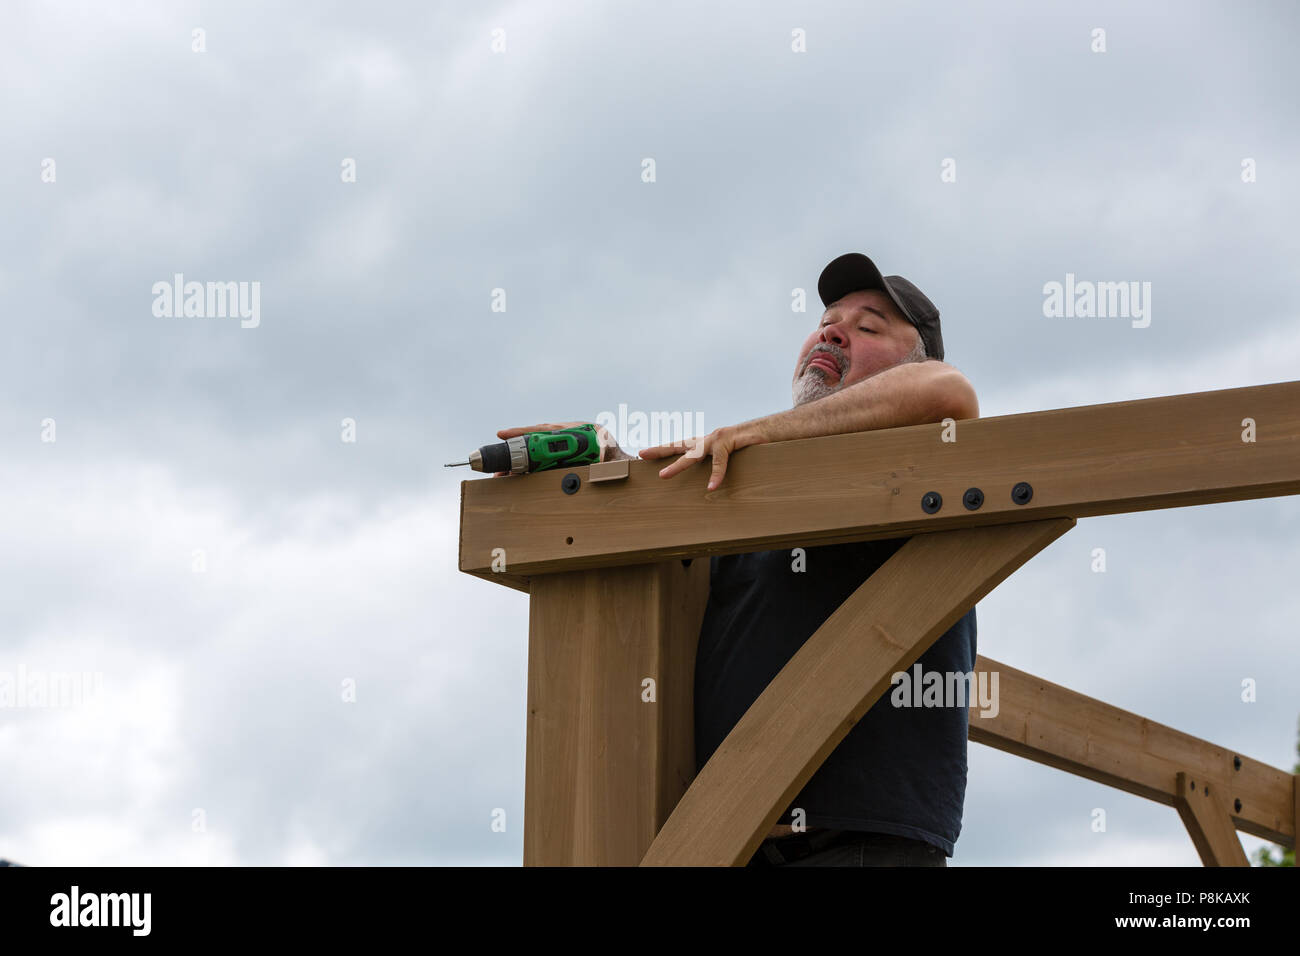 Mature man falling while assembling wooden pergola with cordless drill-driver Stock Photo